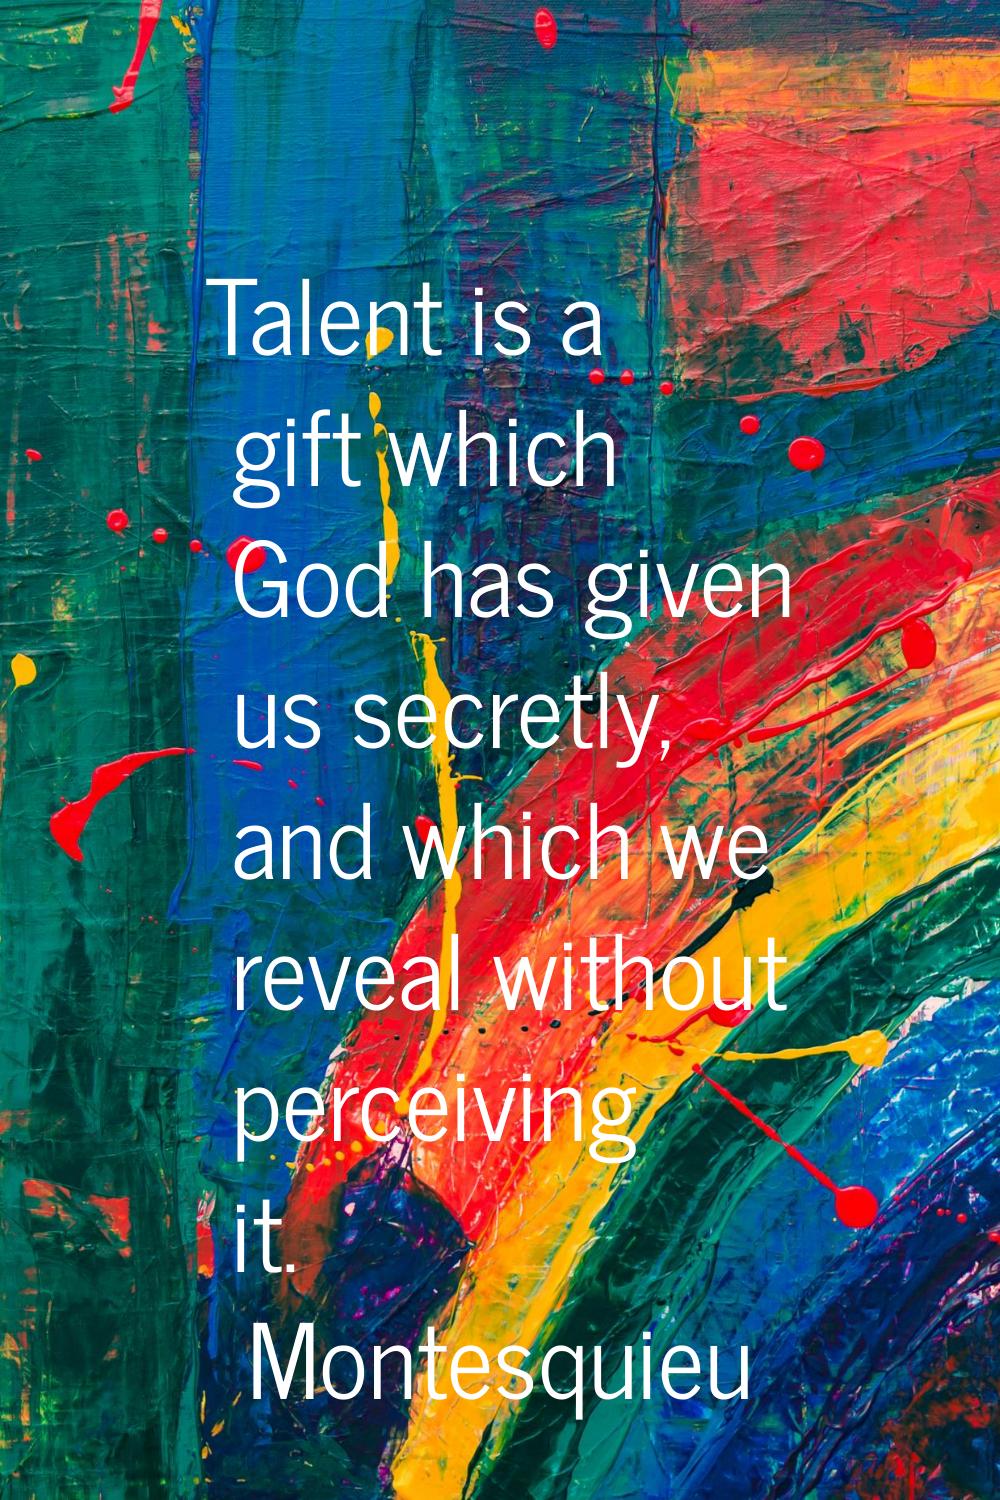 Talent is a gift which God has given us secretly, and which we reveal without perceiving it.